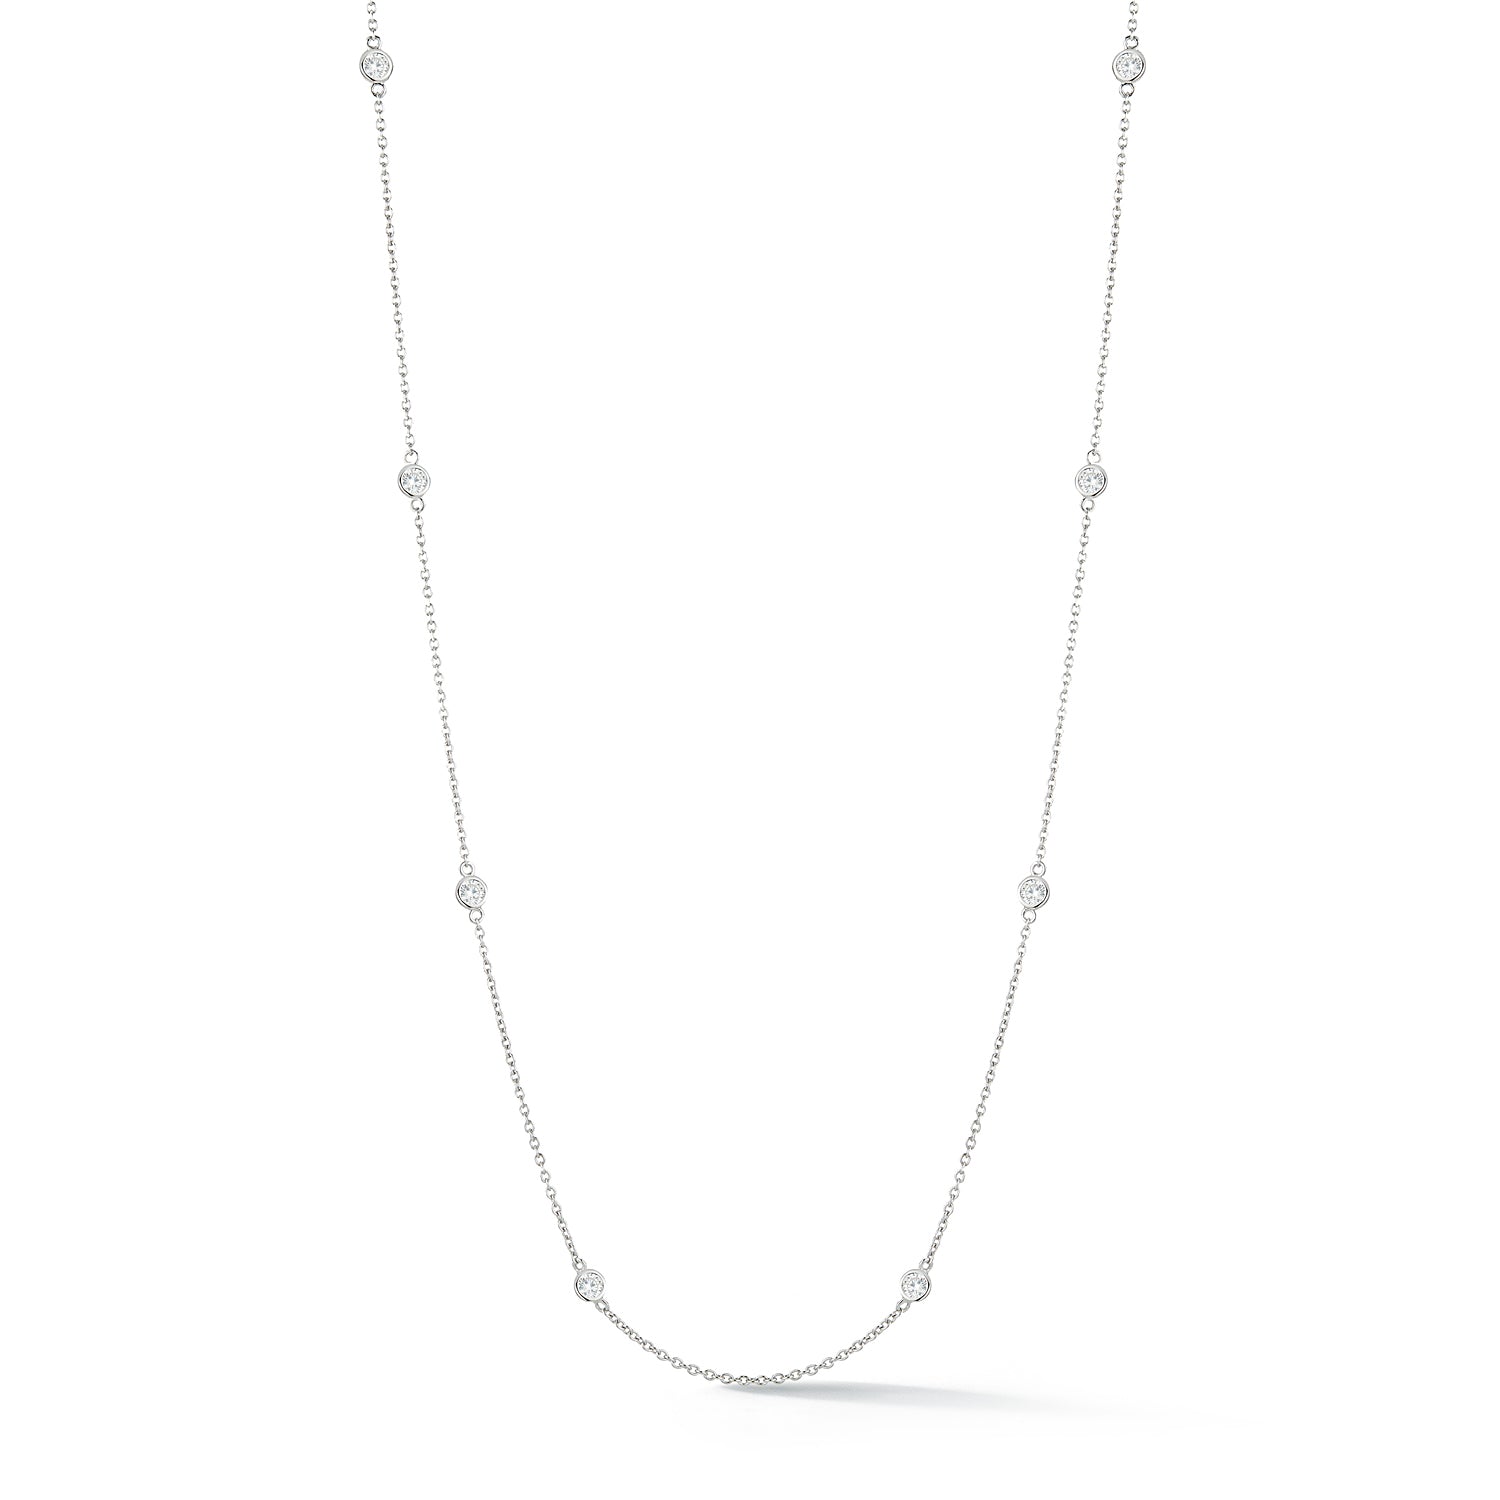 Ethereal Diamond Necklace Set in Yellow and White Gold